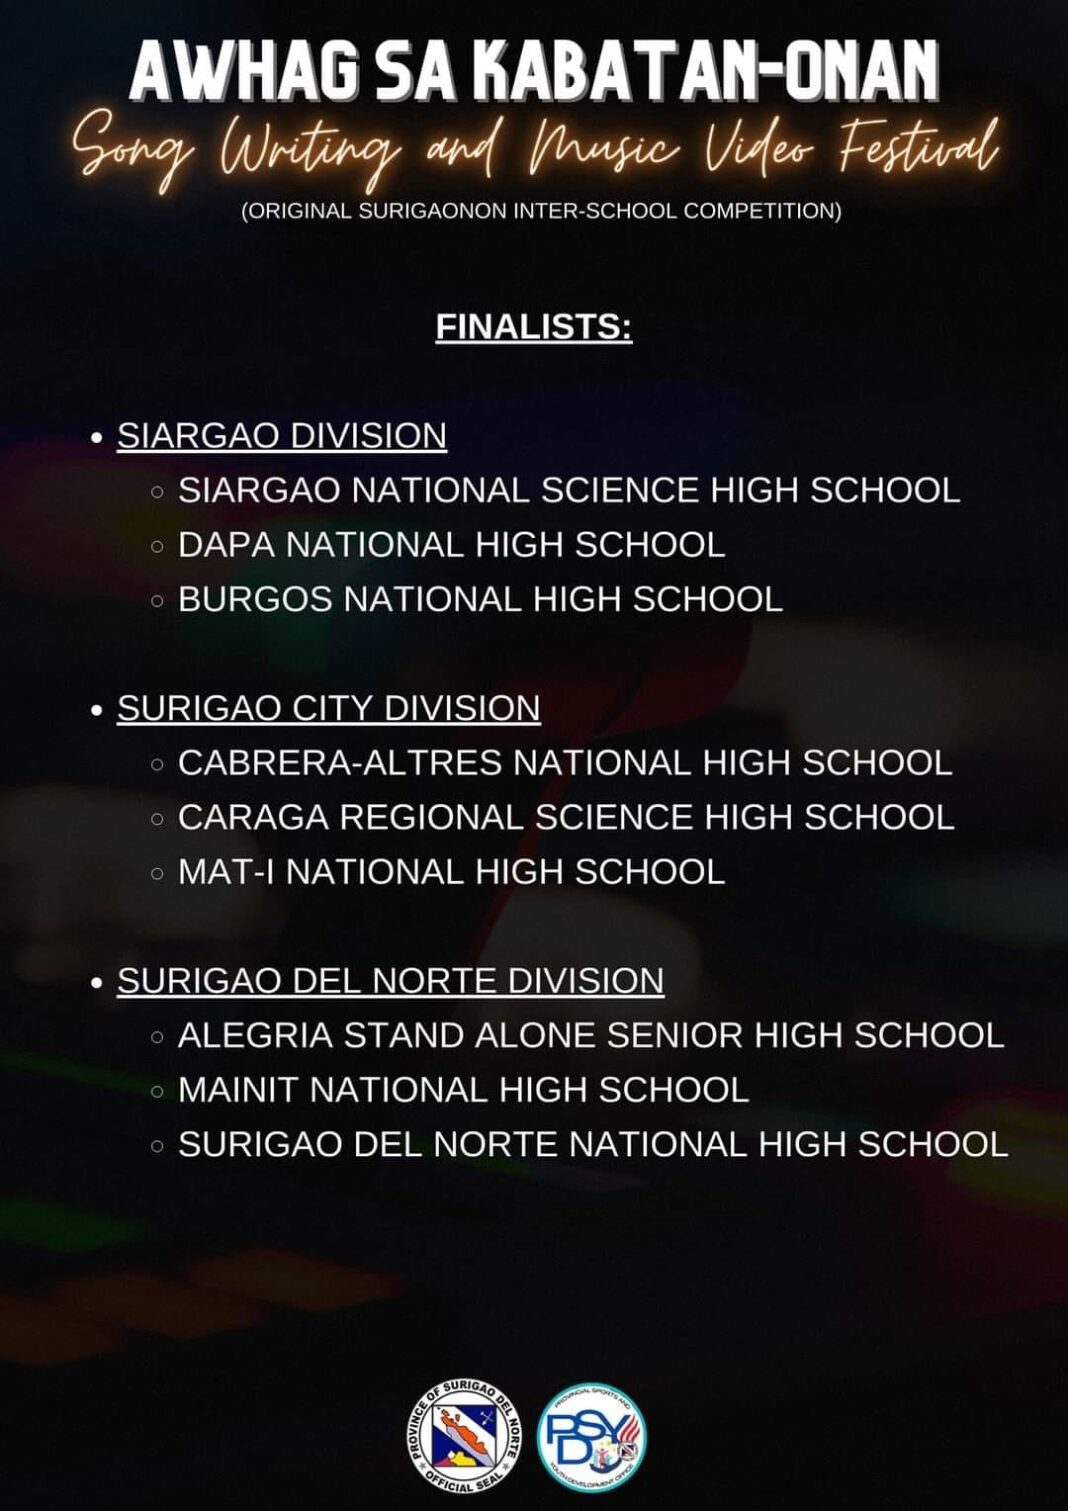 The list of the finalists